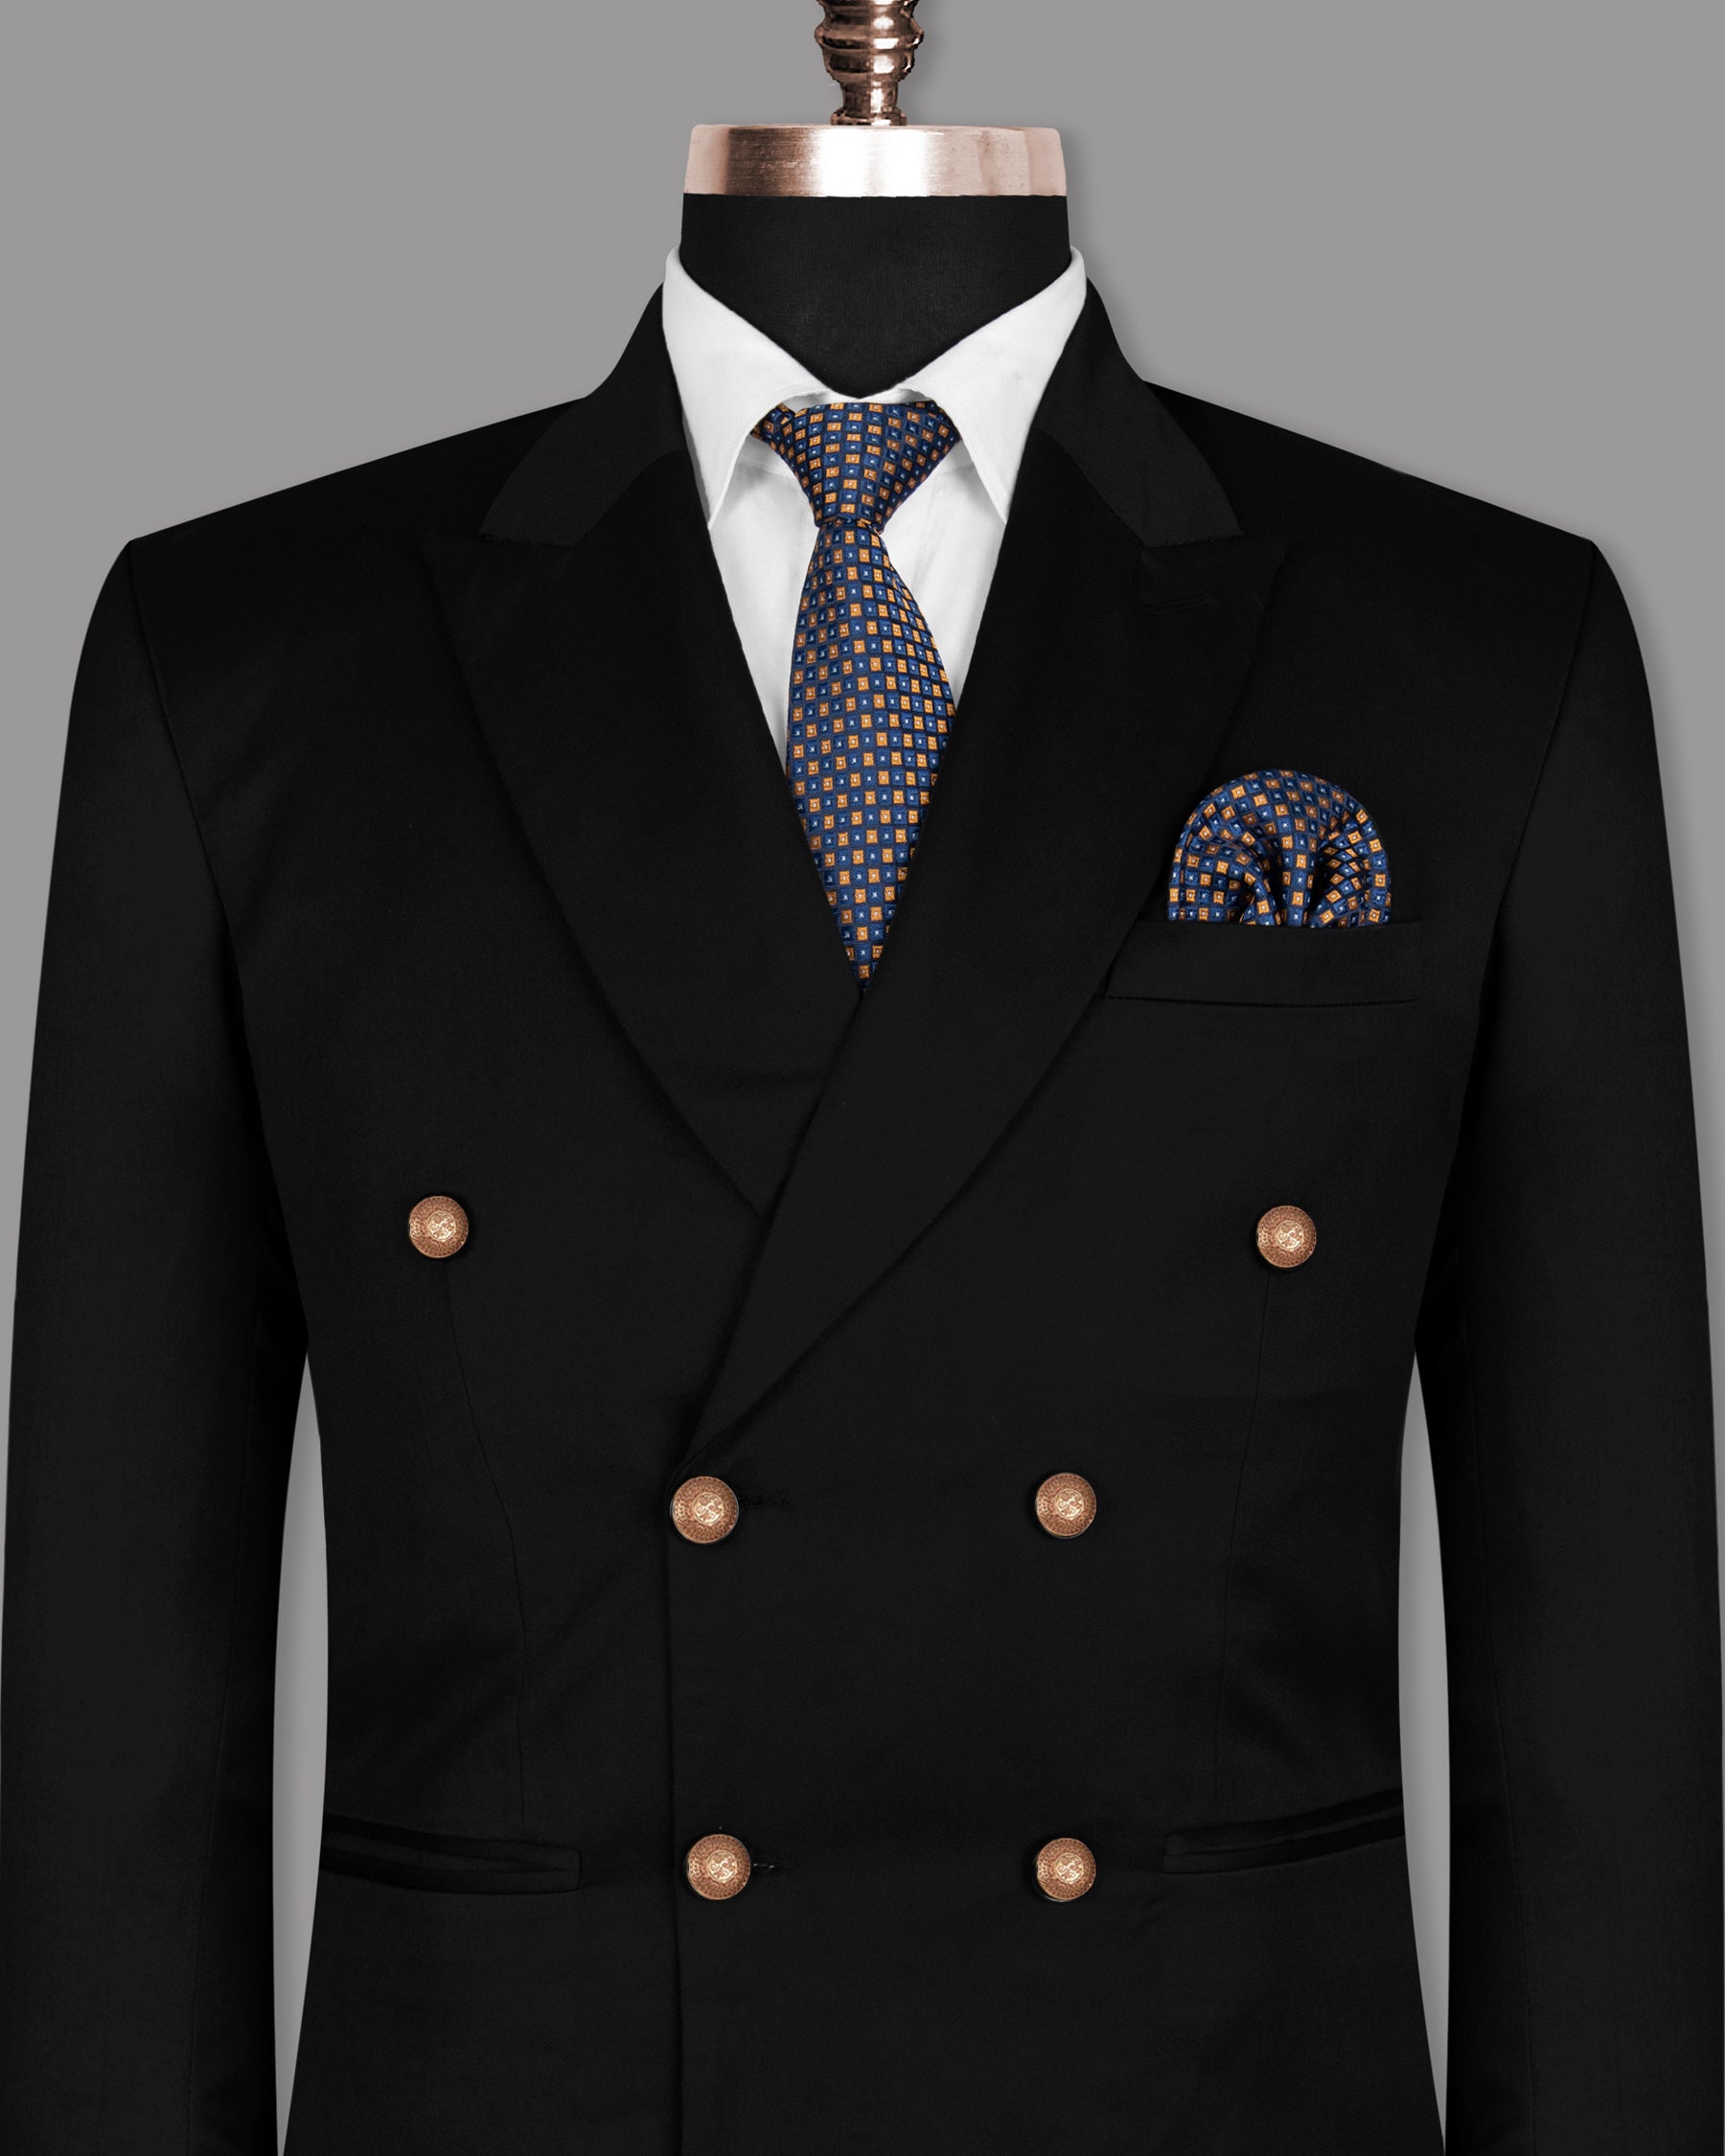 Jade Black Golden Buttons Double-Breasted Wool Rich Blazer BL1484-DB-GB-36, BL1484-DB-GB-38, BL1484-DB-GB-40, BL1484-DB-GB-42, BL1484-DB-GB-44, BL1484-DB-GB-46, BL1484-DB-GB-48, BL1484-DB-GB-50, BL1484-DB-GB-52, BL1484-DB-GB-54, BL1484-DB-GB-56, BL1484-DB-GB-58, BL1484-DB-GB-60